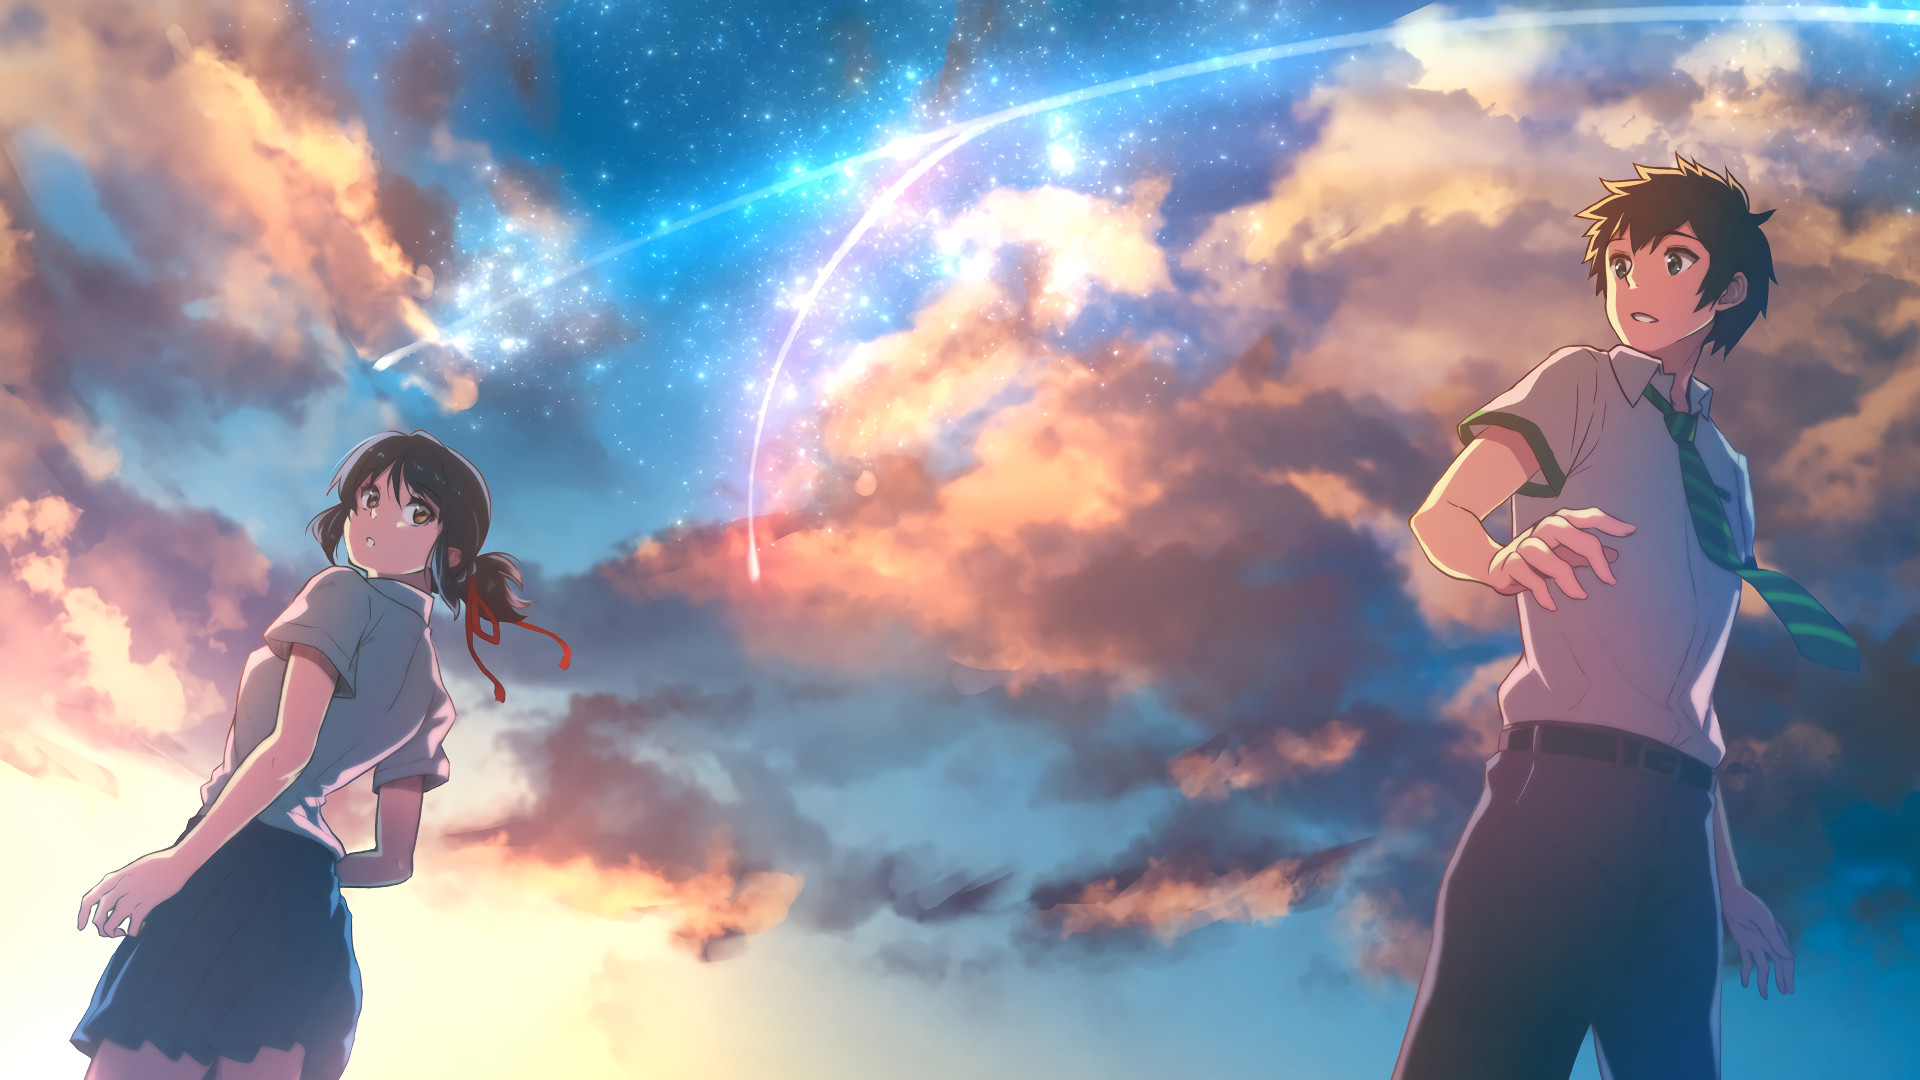 HD Wallpaper Background ID731746. Anime Your Name